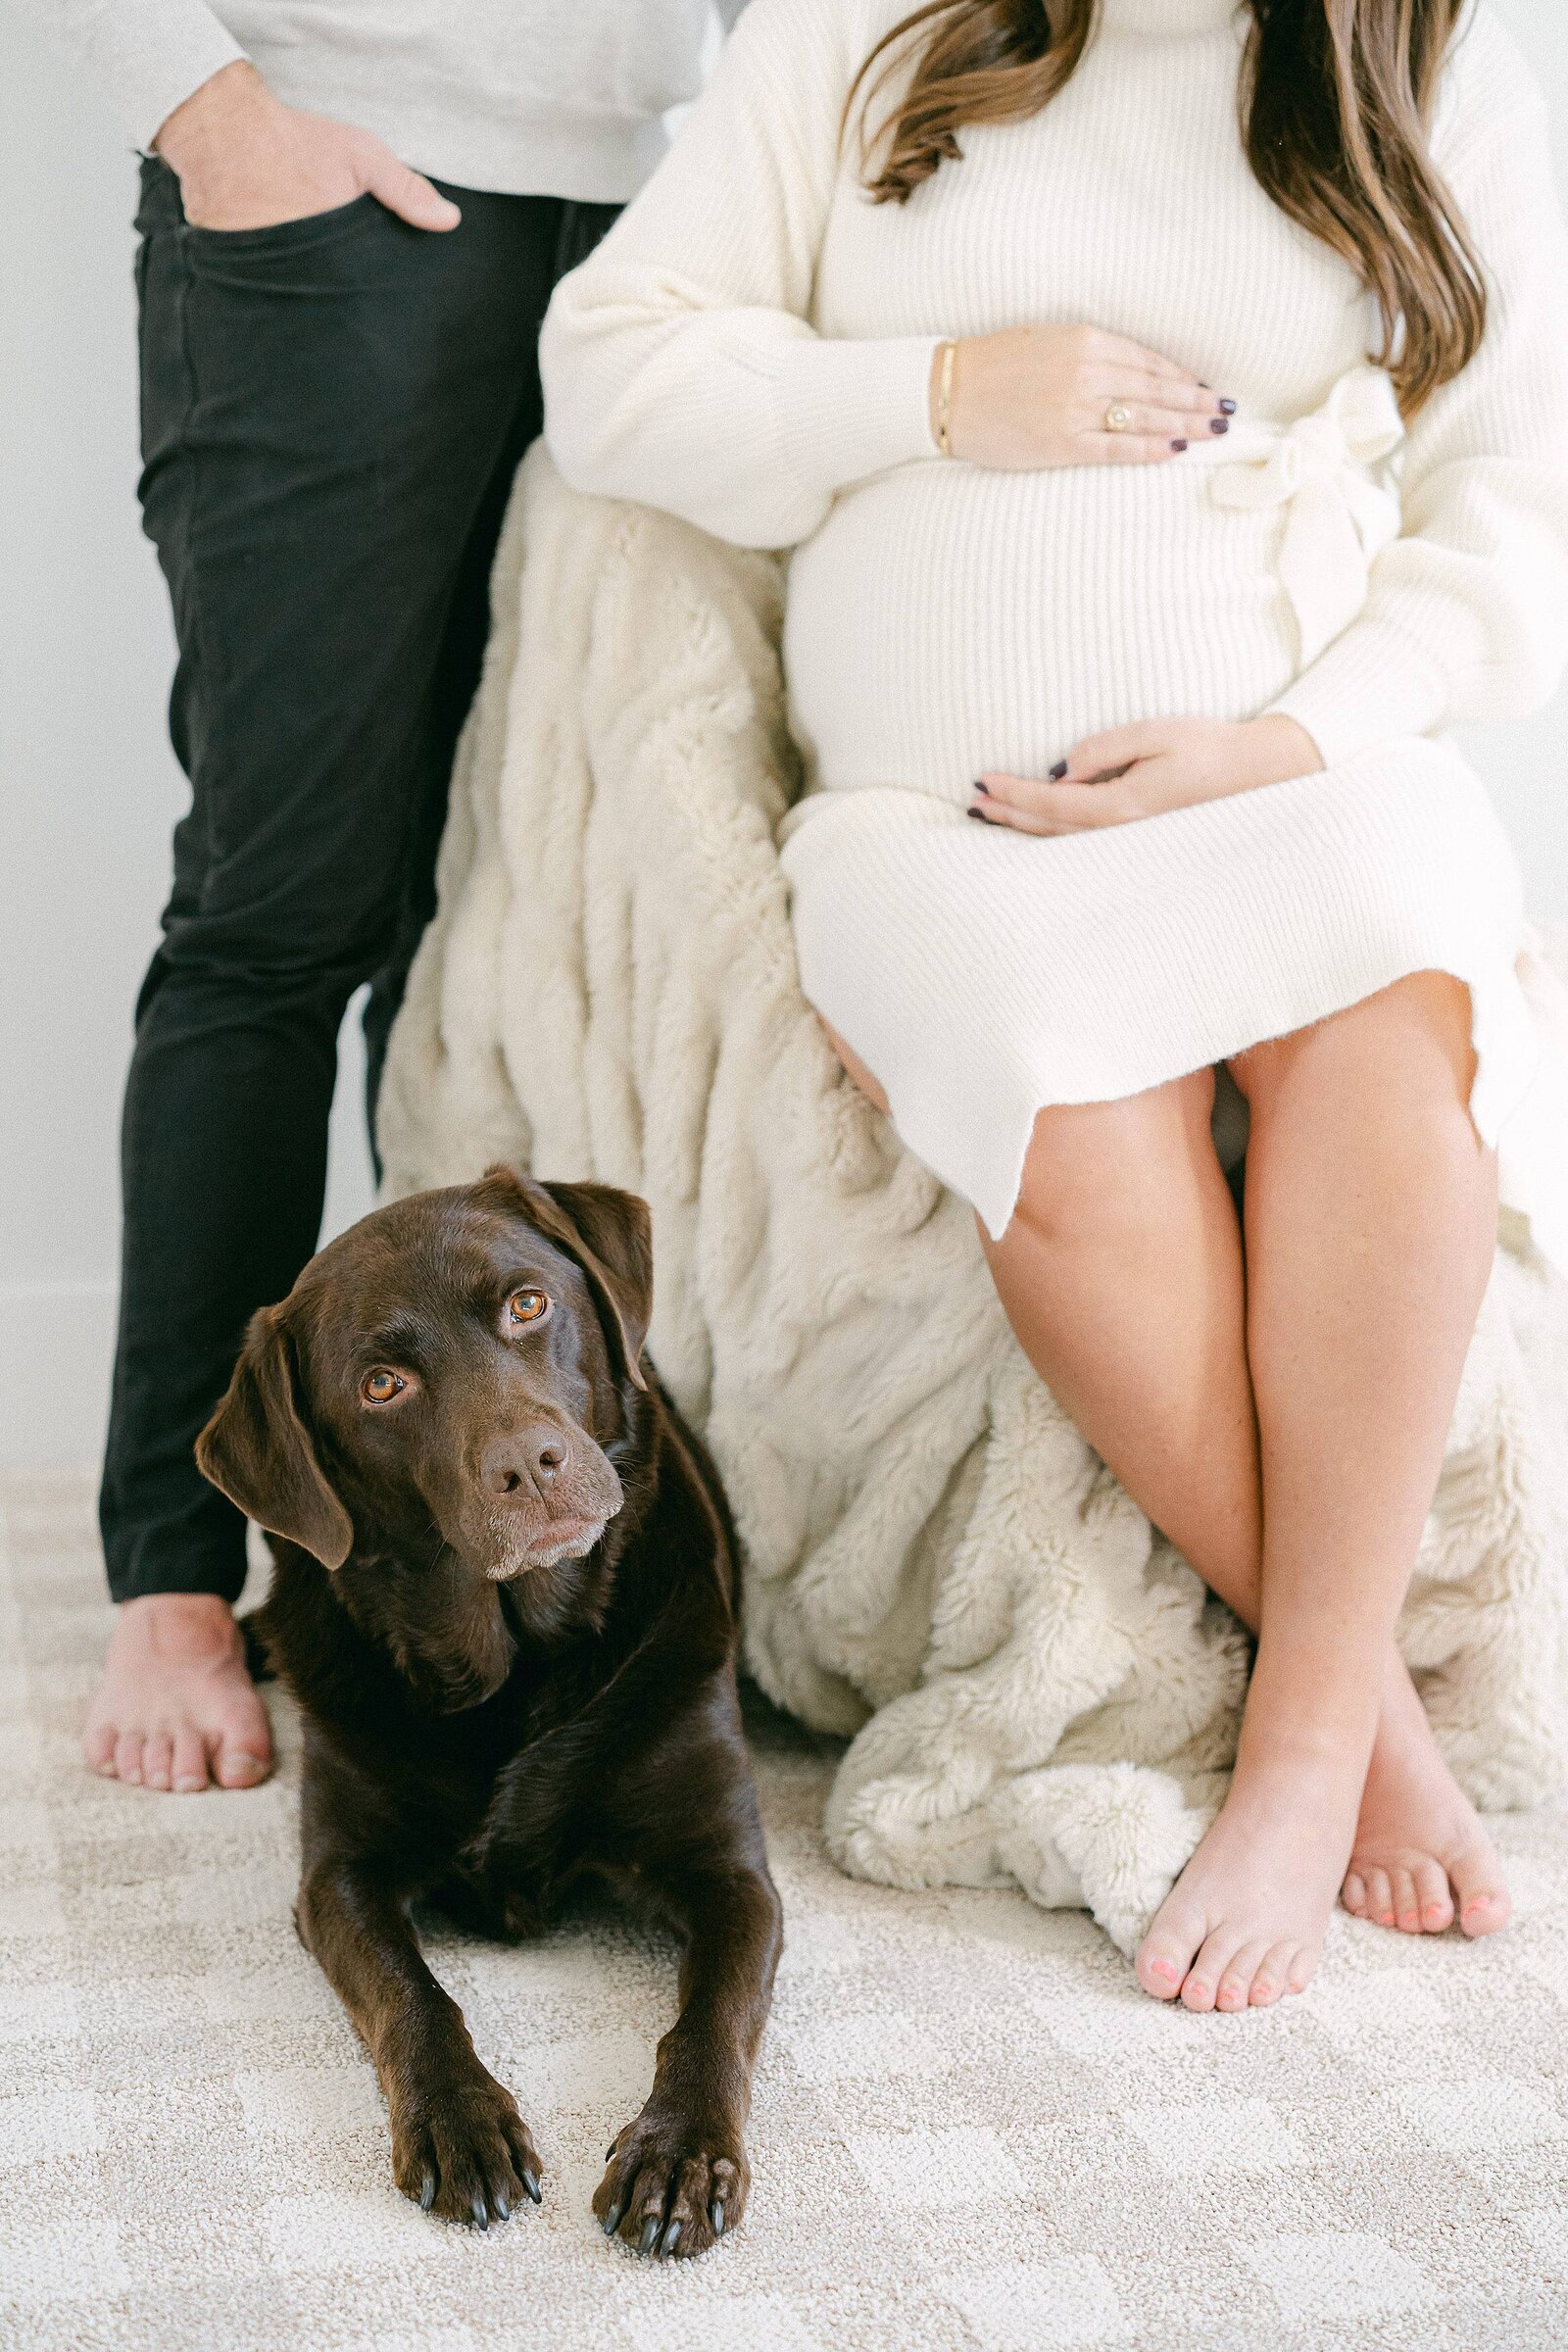 South_Bend_Maternity_Photography_Katie_Whitcomb_0007